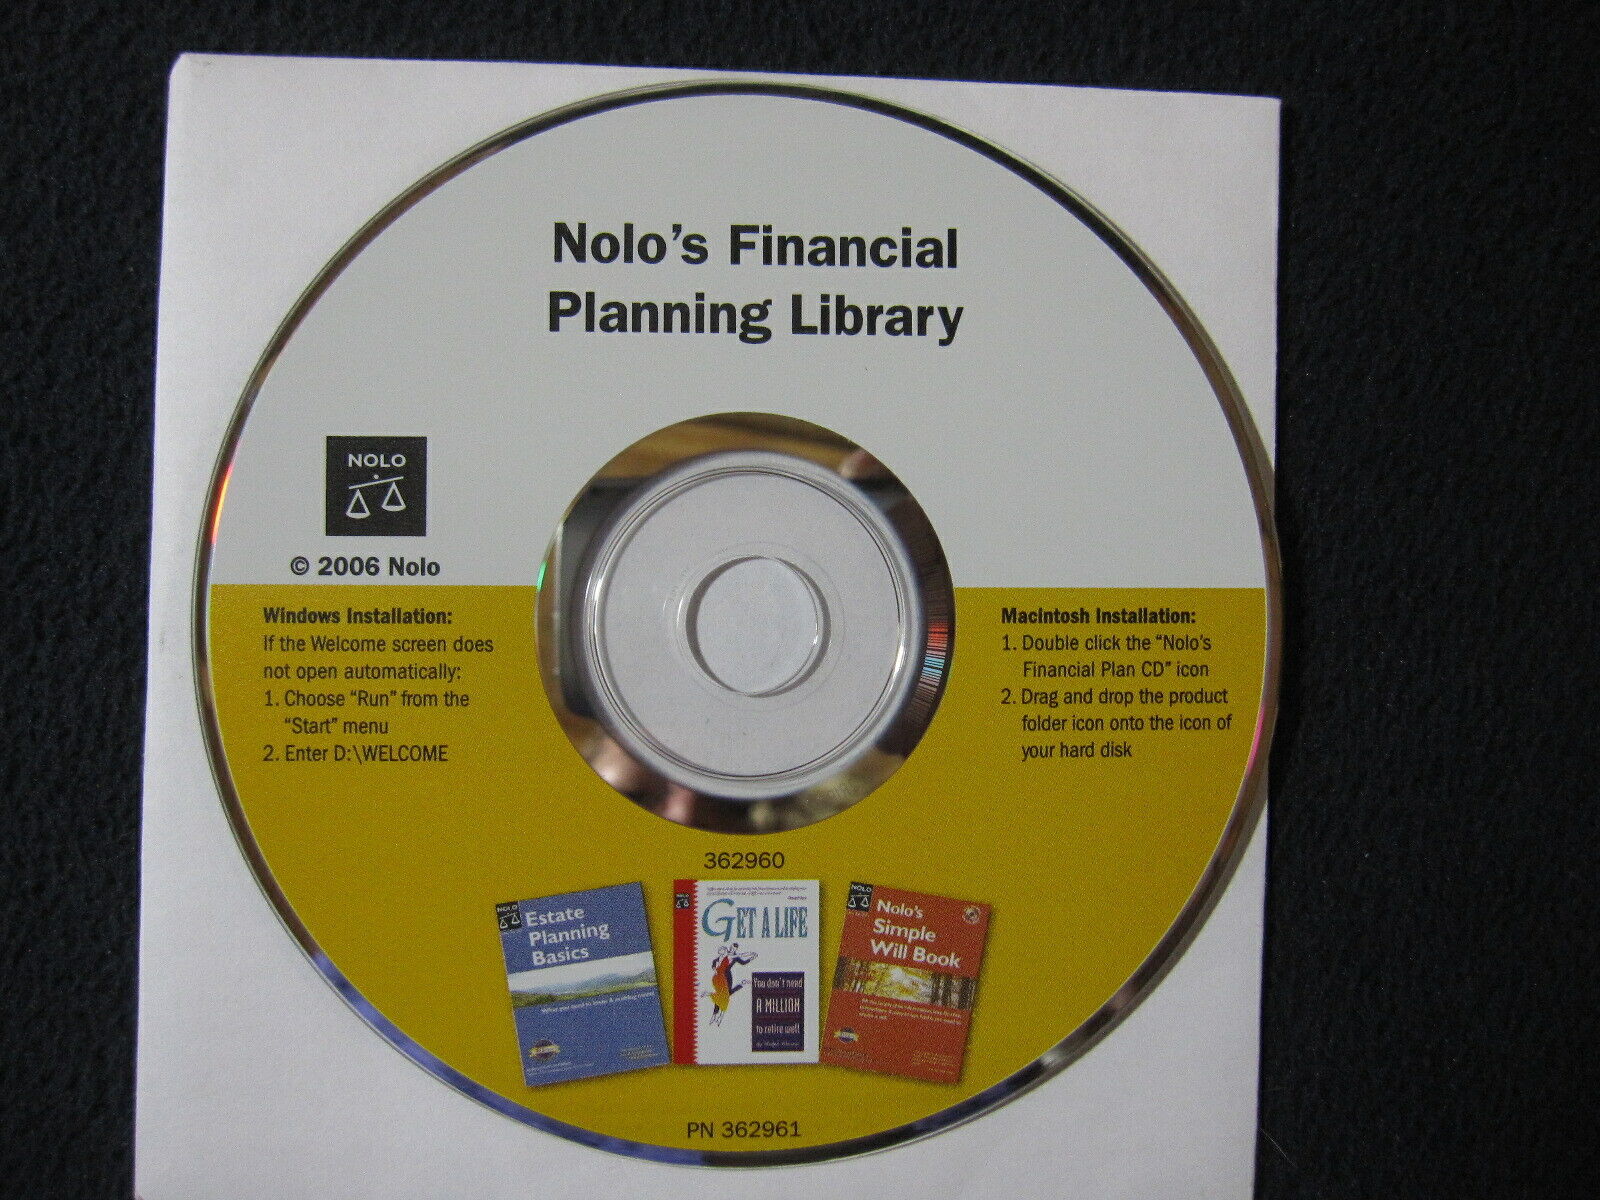 Nolo's Financial Planning Library [CD-ROM] 2006